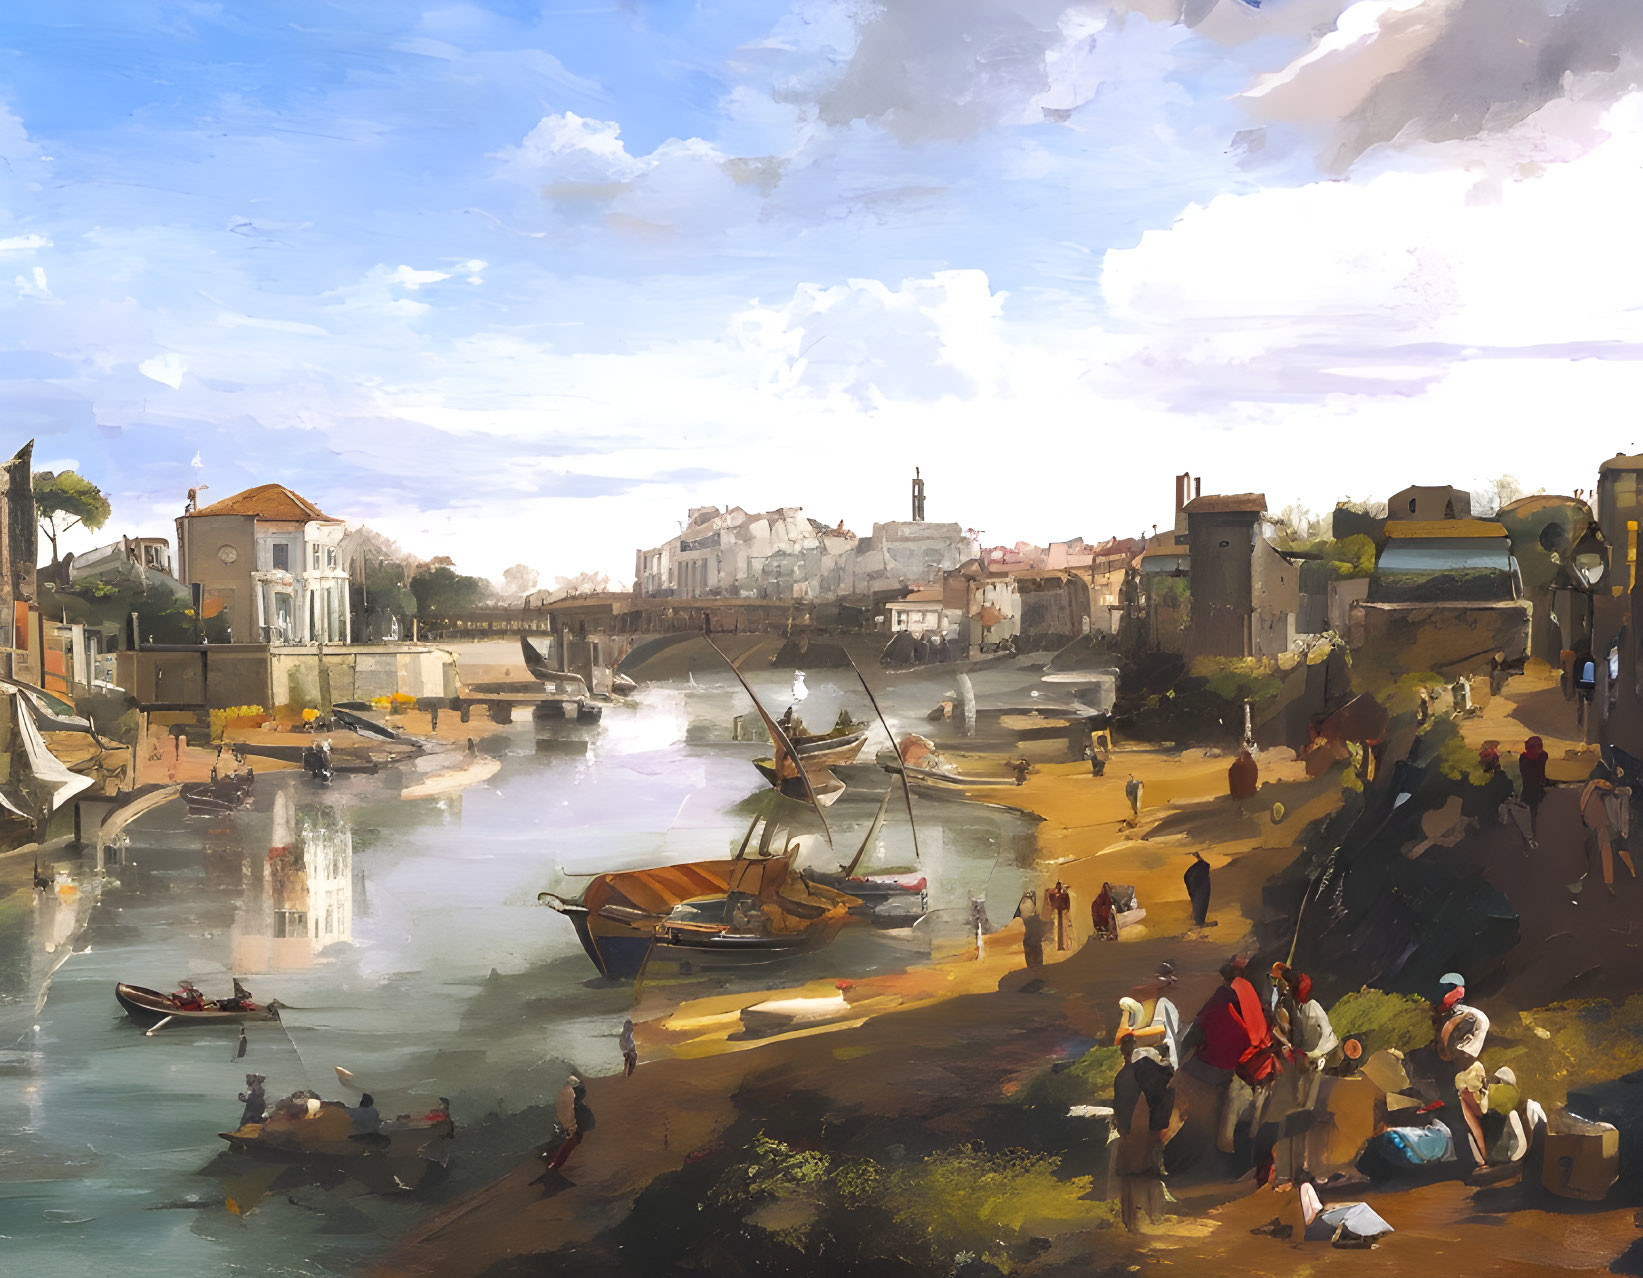 River scene with boats, trade activities, bridge, old-world architecture under bright sky